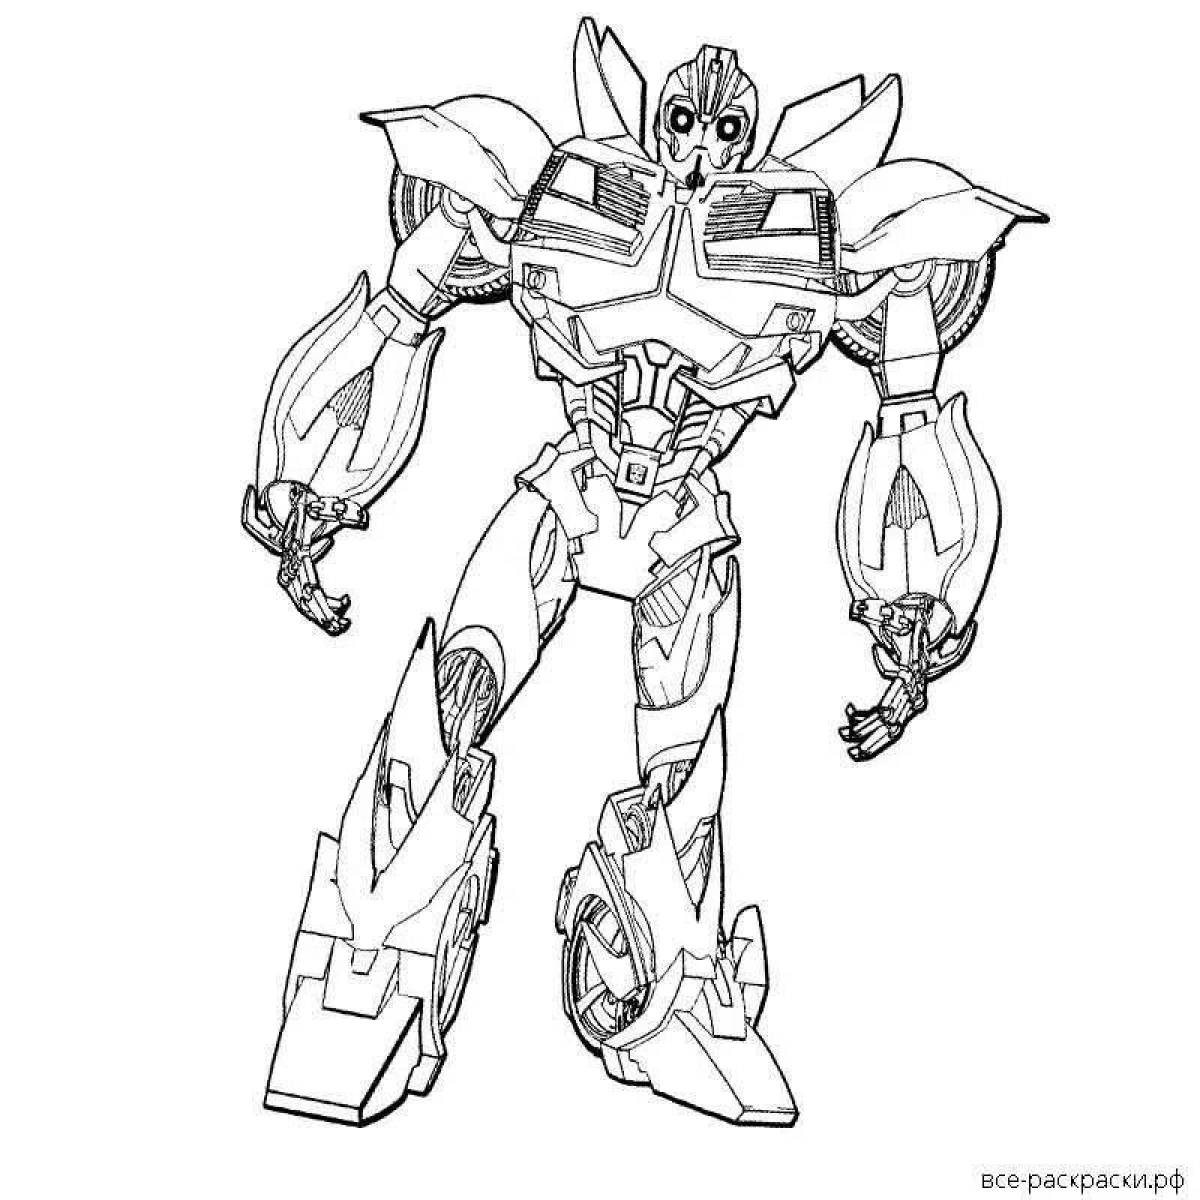 Colorfully crafted transformers prime coloring page